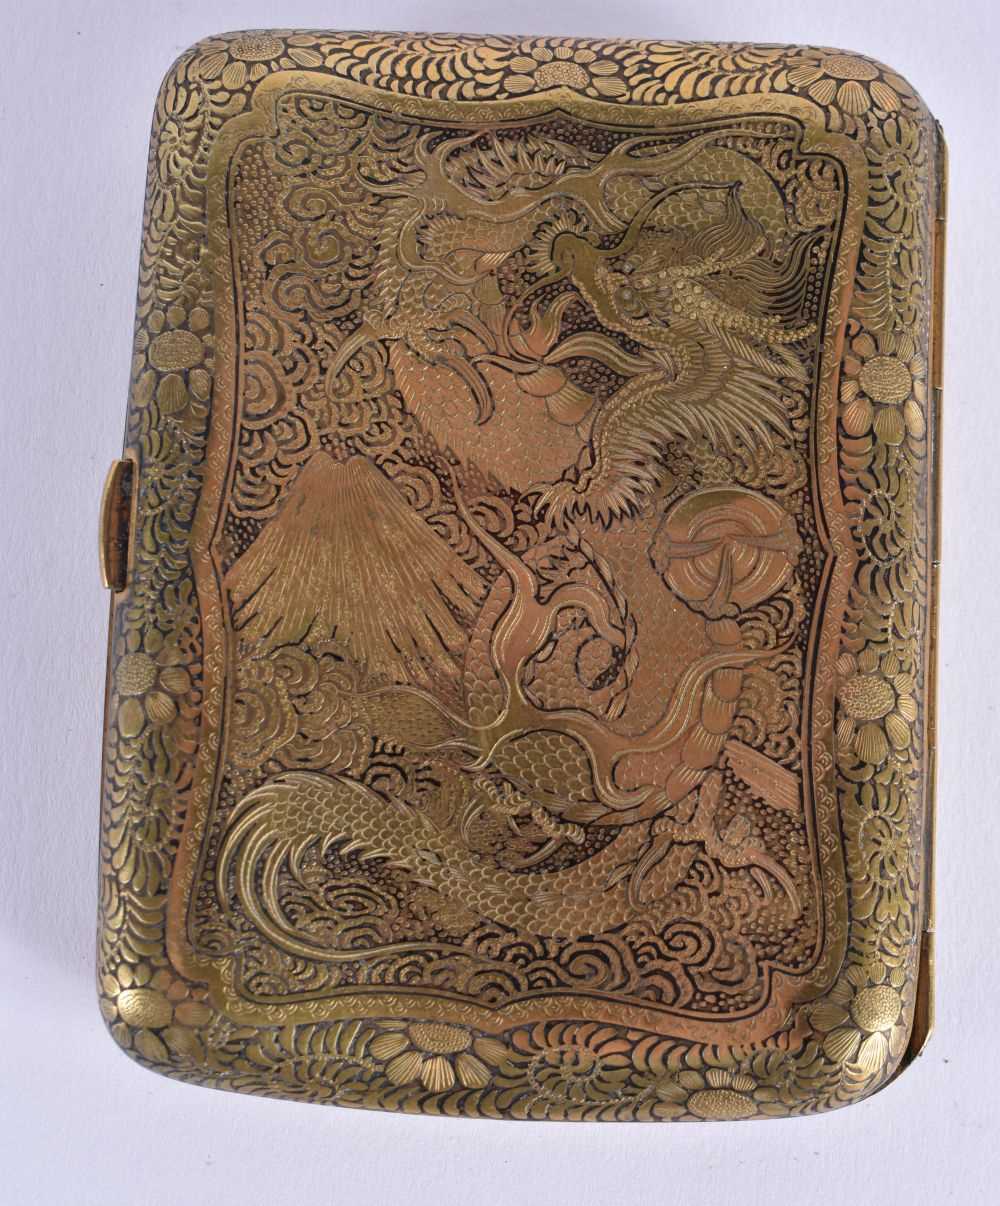 A 19TH CENTURY JAPANESE MEIJI PERIOD KOMAI STYLE DAMASCENED CIGARETTE CASE decorated with dragons - Image 3 of 3